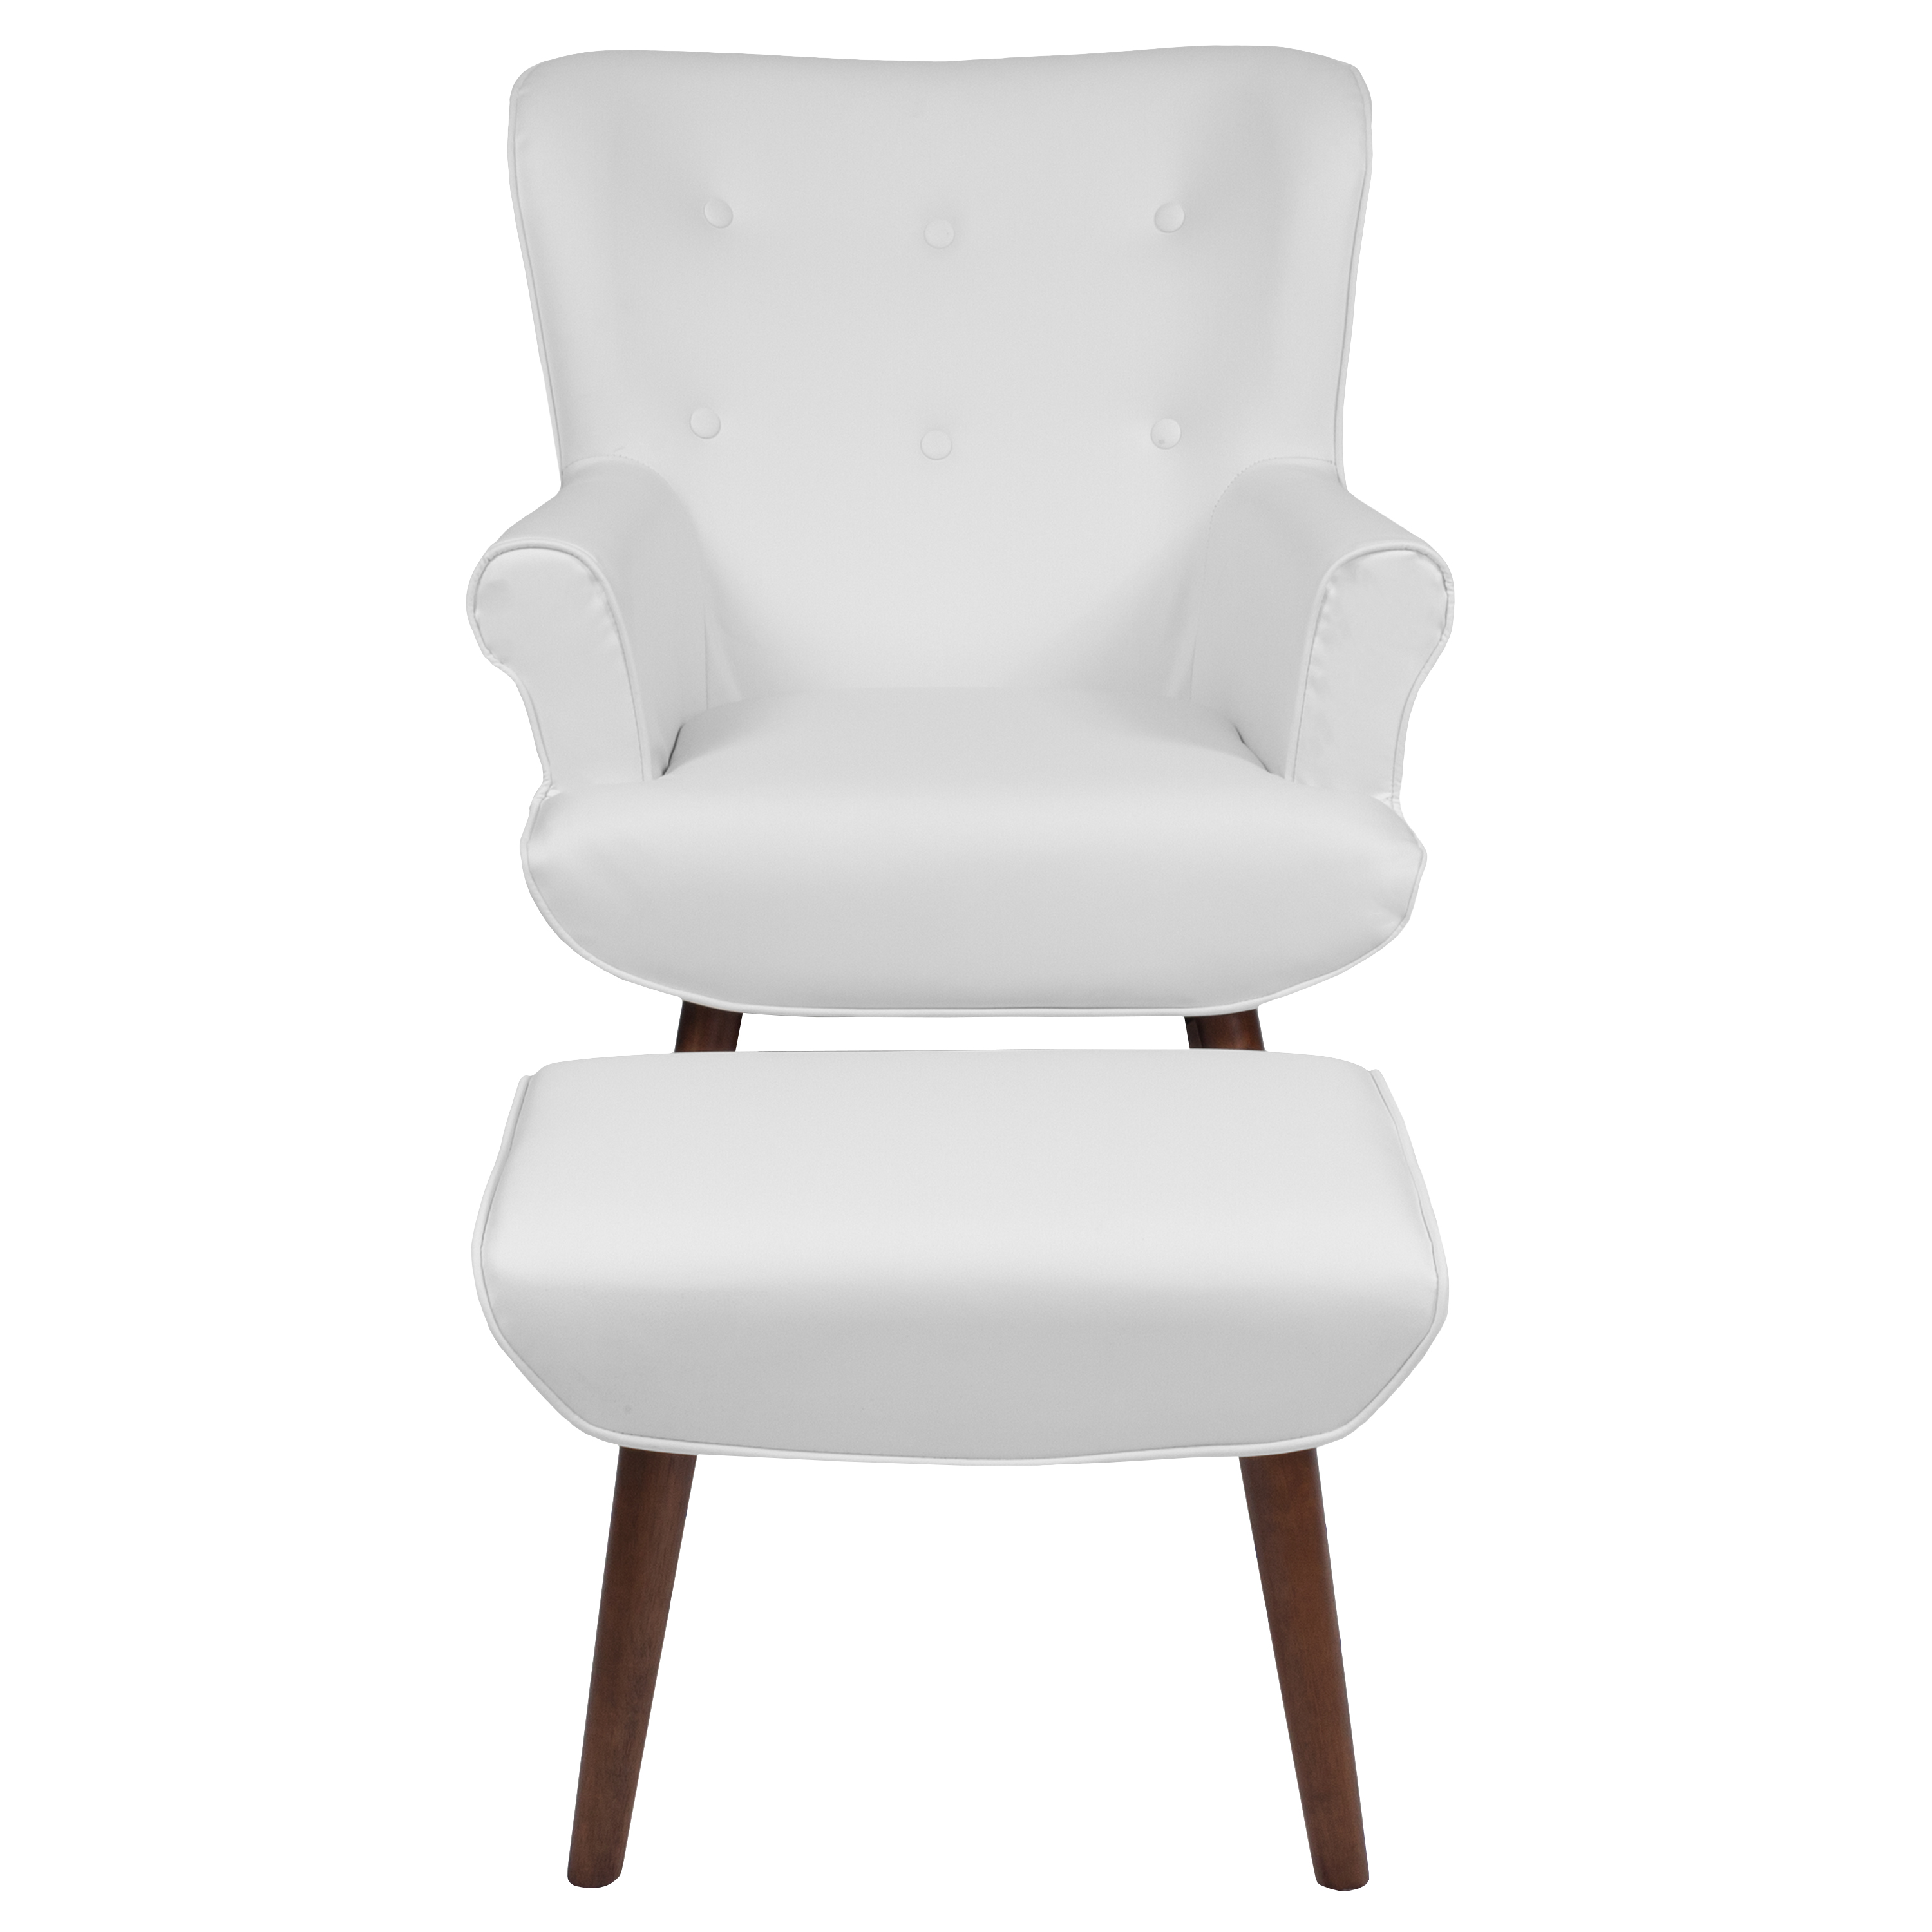 Flash Furniture Bayton Upholstered Wingback Chair with Ottoman in White LeatherSoft - image 4 of 4